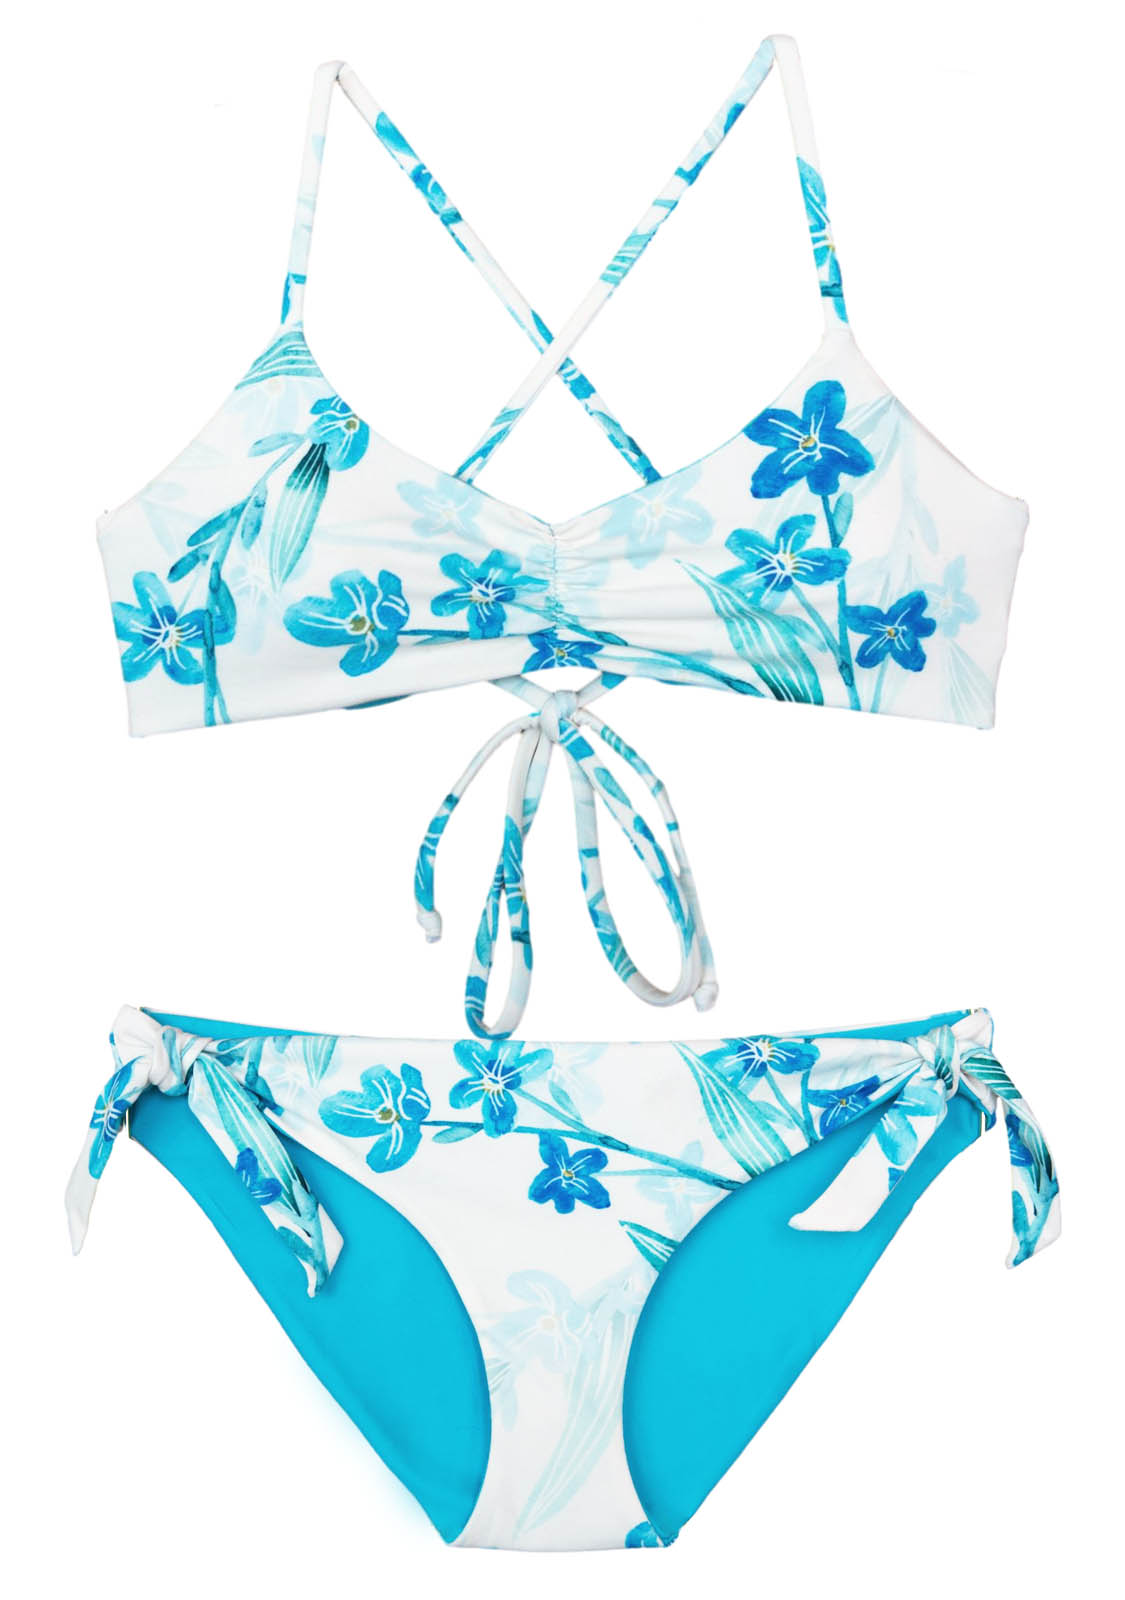 Floral -Blue, white, teal Reversible two-piece swimsuit with padded triangle top and modest yet stylish bottoms.